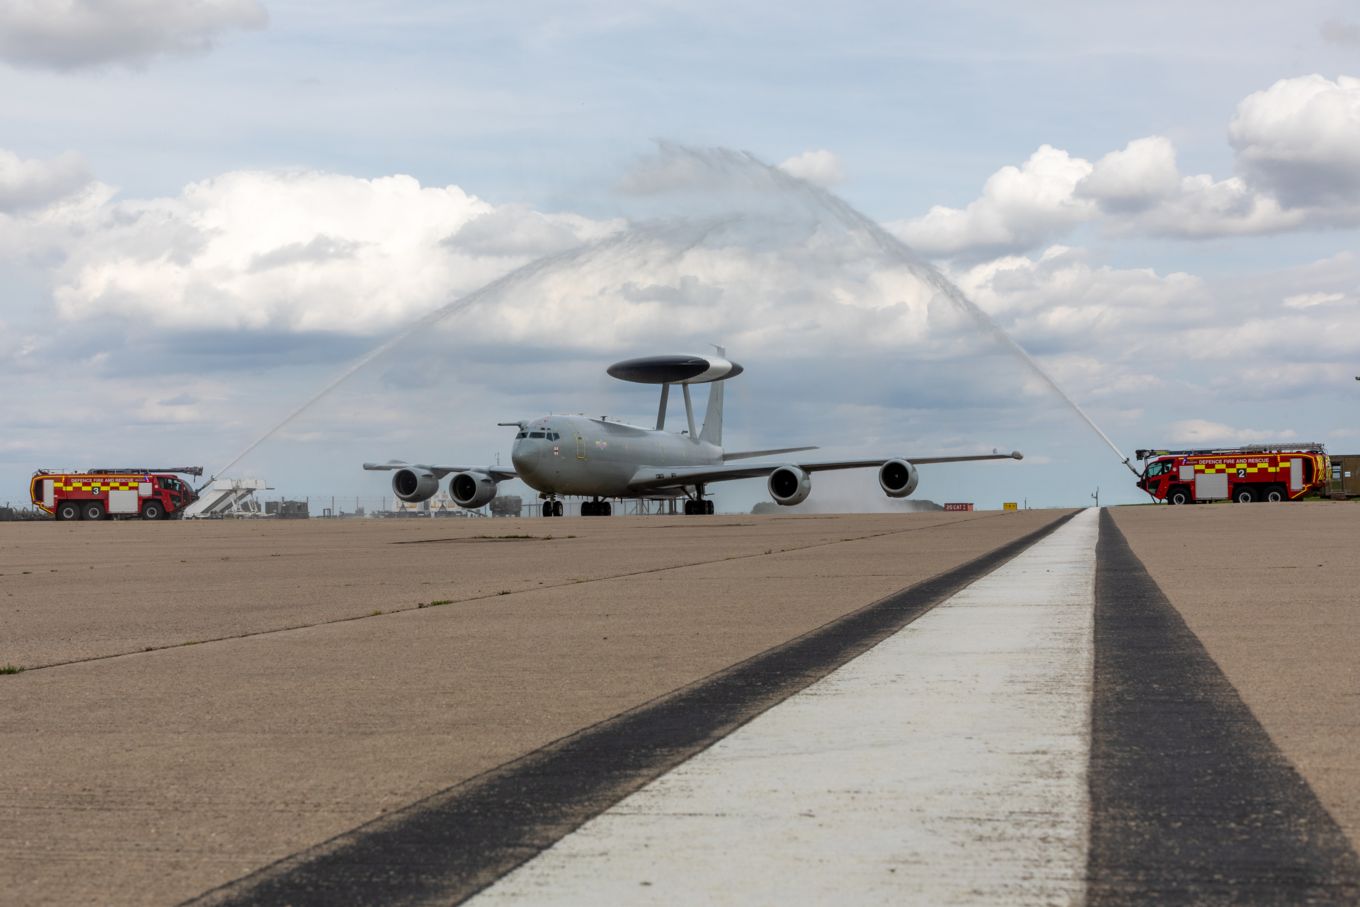 E-3D Sentry on the runway with water arch from emergency vehicles.